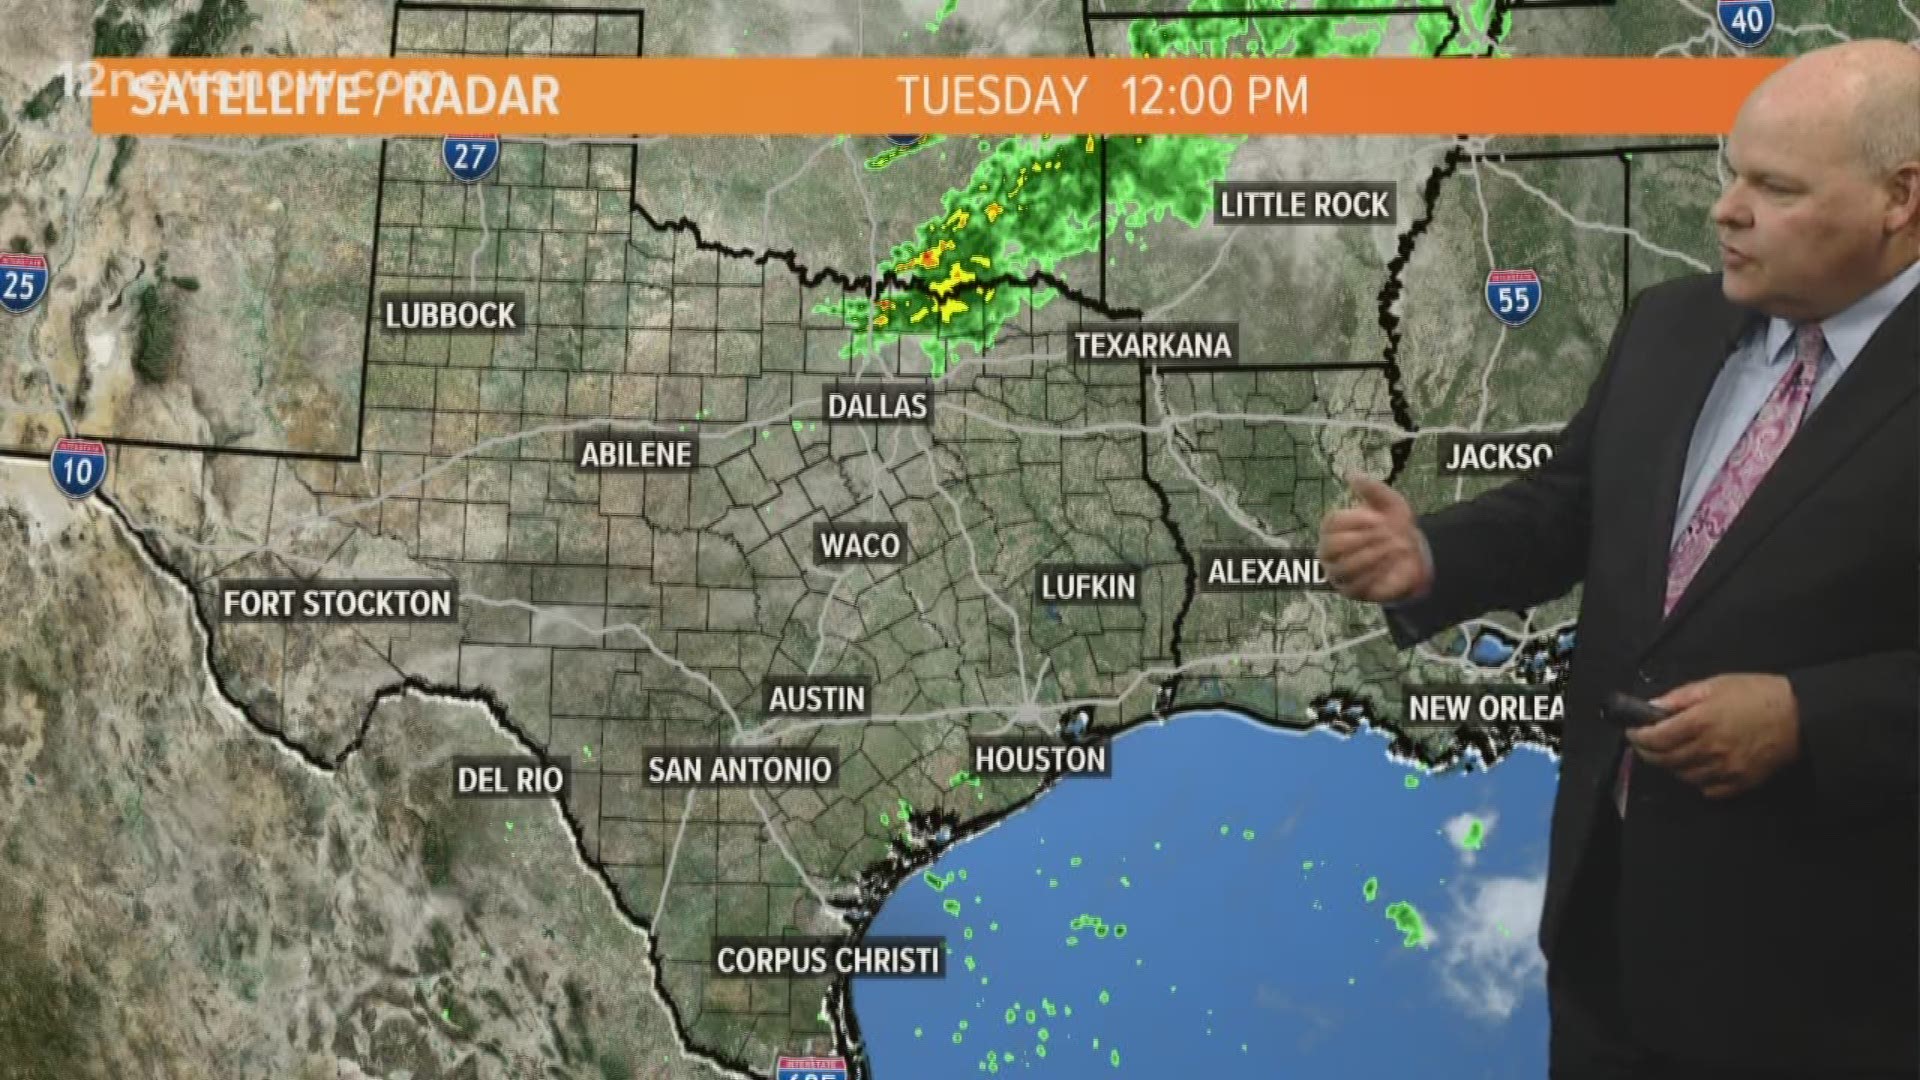 12News Meteorologist Jeff Gerber says scattered showers possible over weekend